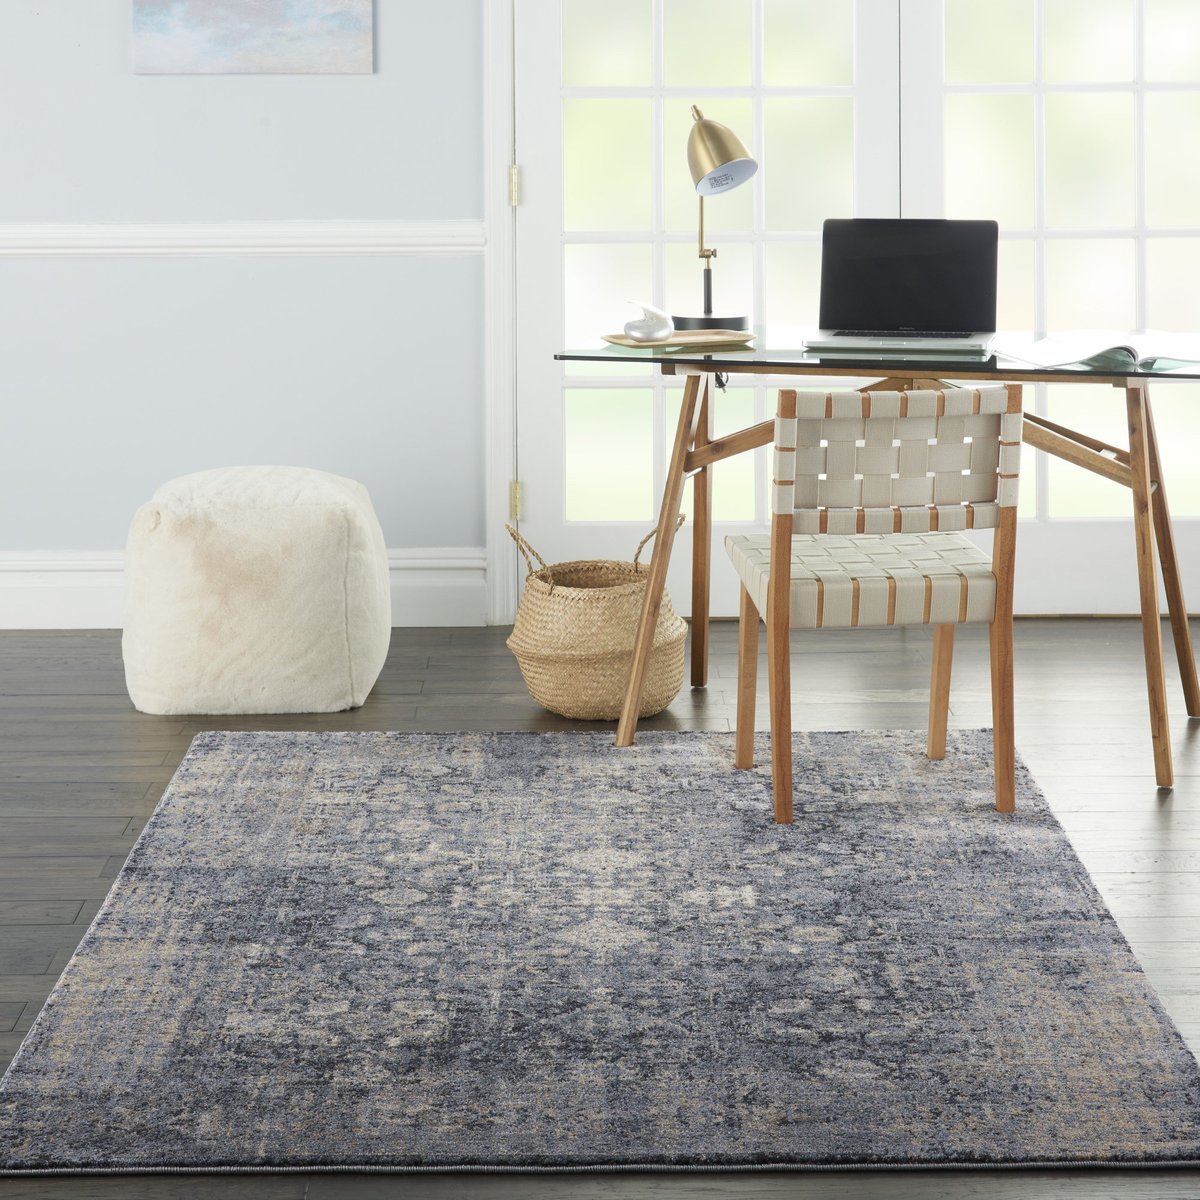 Timeless Appeal Office Rug Ideas